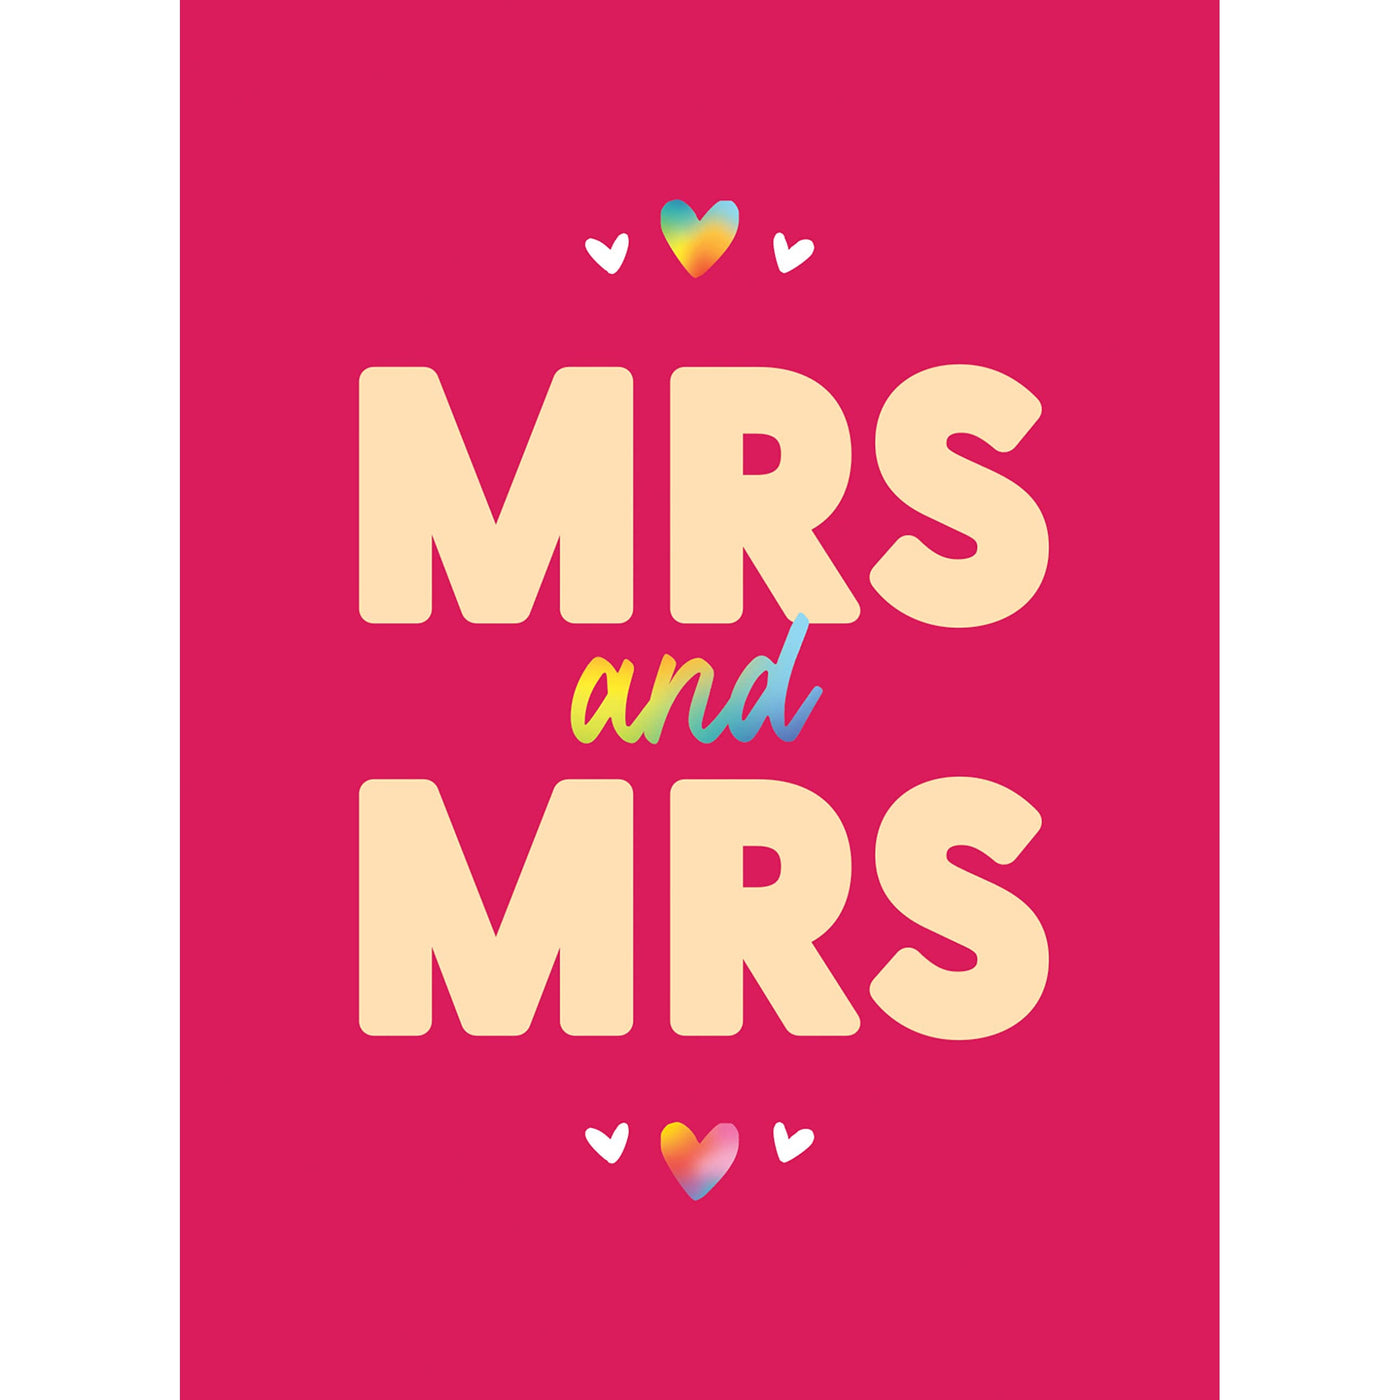 Mrs & Mrs: Romantic Quotes And Affirmations To Say “I Love You” To Your Partner